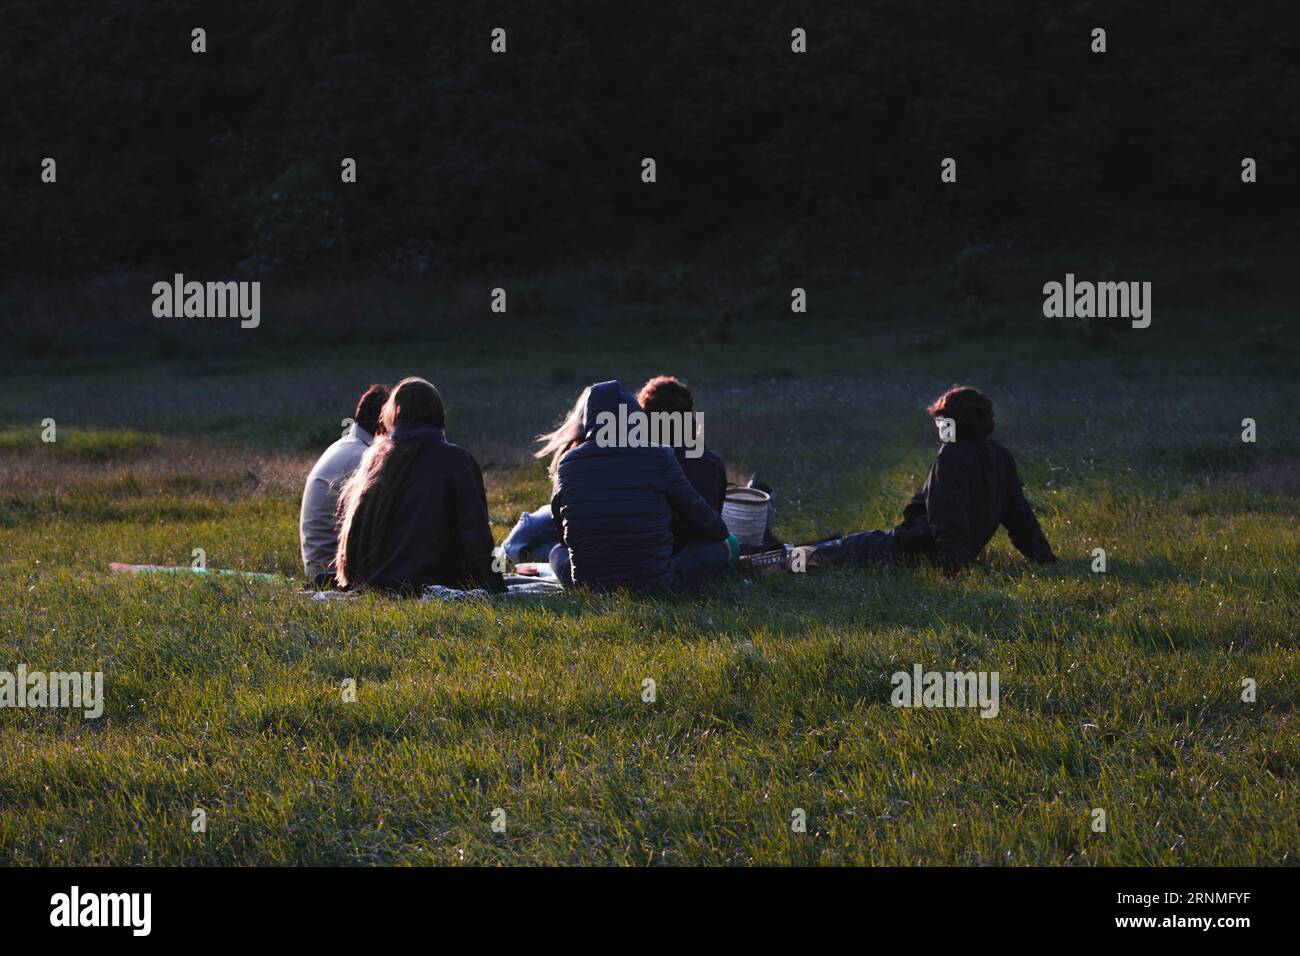 Group of young people sitting together on a day out in public park near sunset, enjoying company Stock Photo